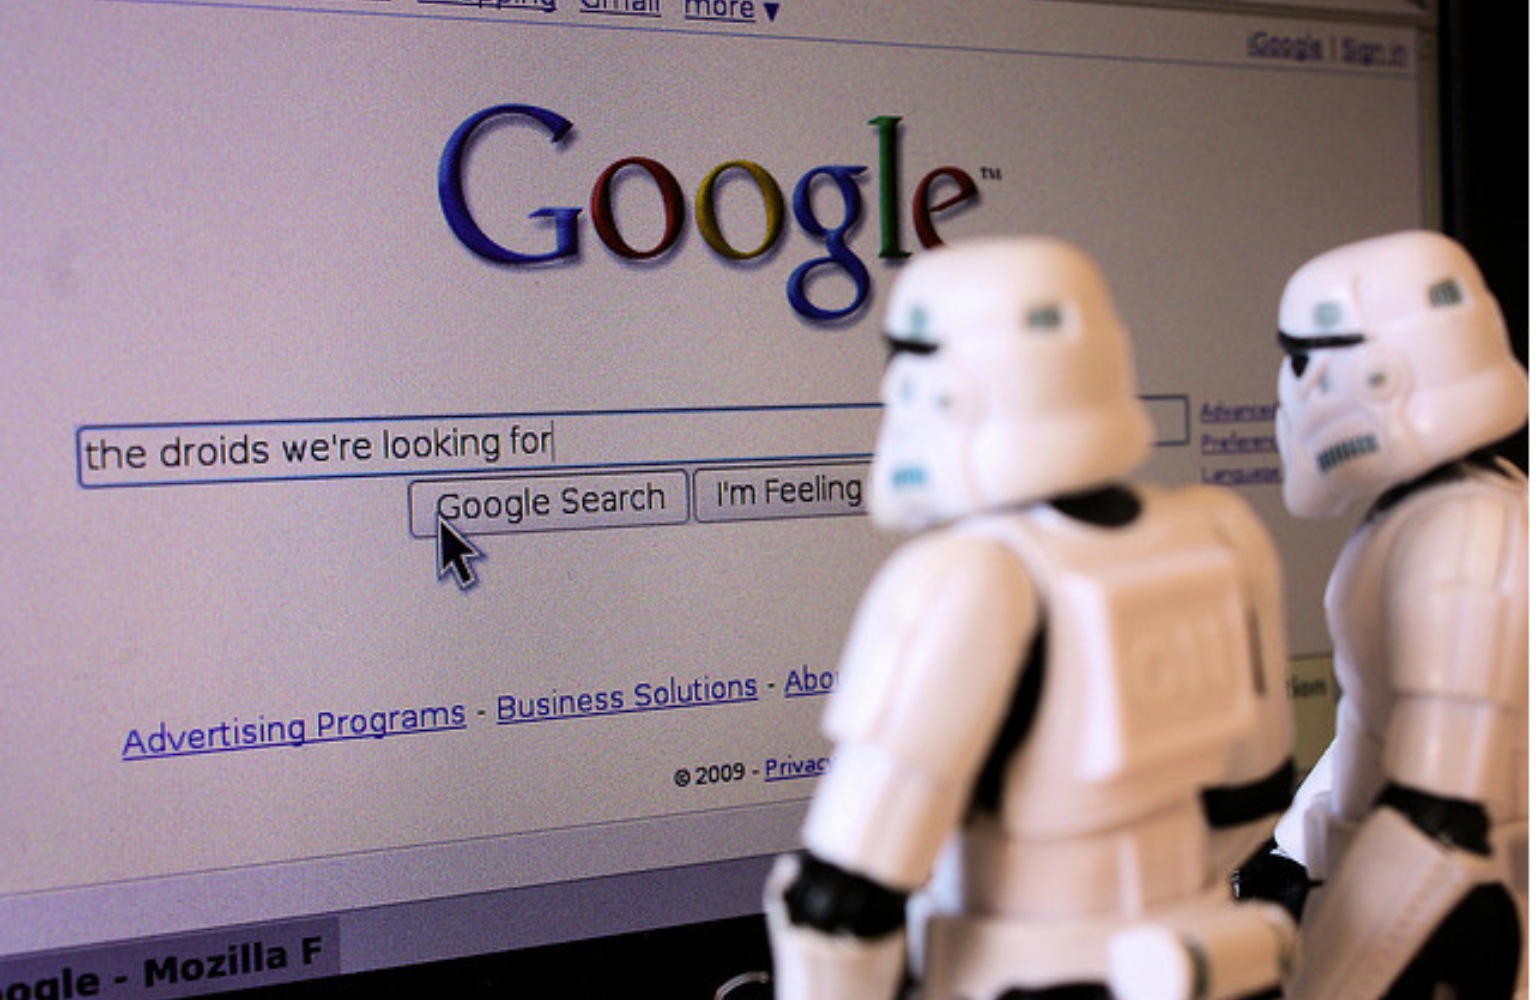 google-unleashes-wonderfully-nerdy-star-wars-easter-egg-image-cultofandroidcomwp-contentuploads201511star-wars-humour-the-droids-were-looking-for-stormtroopers-use-google-search-jpg